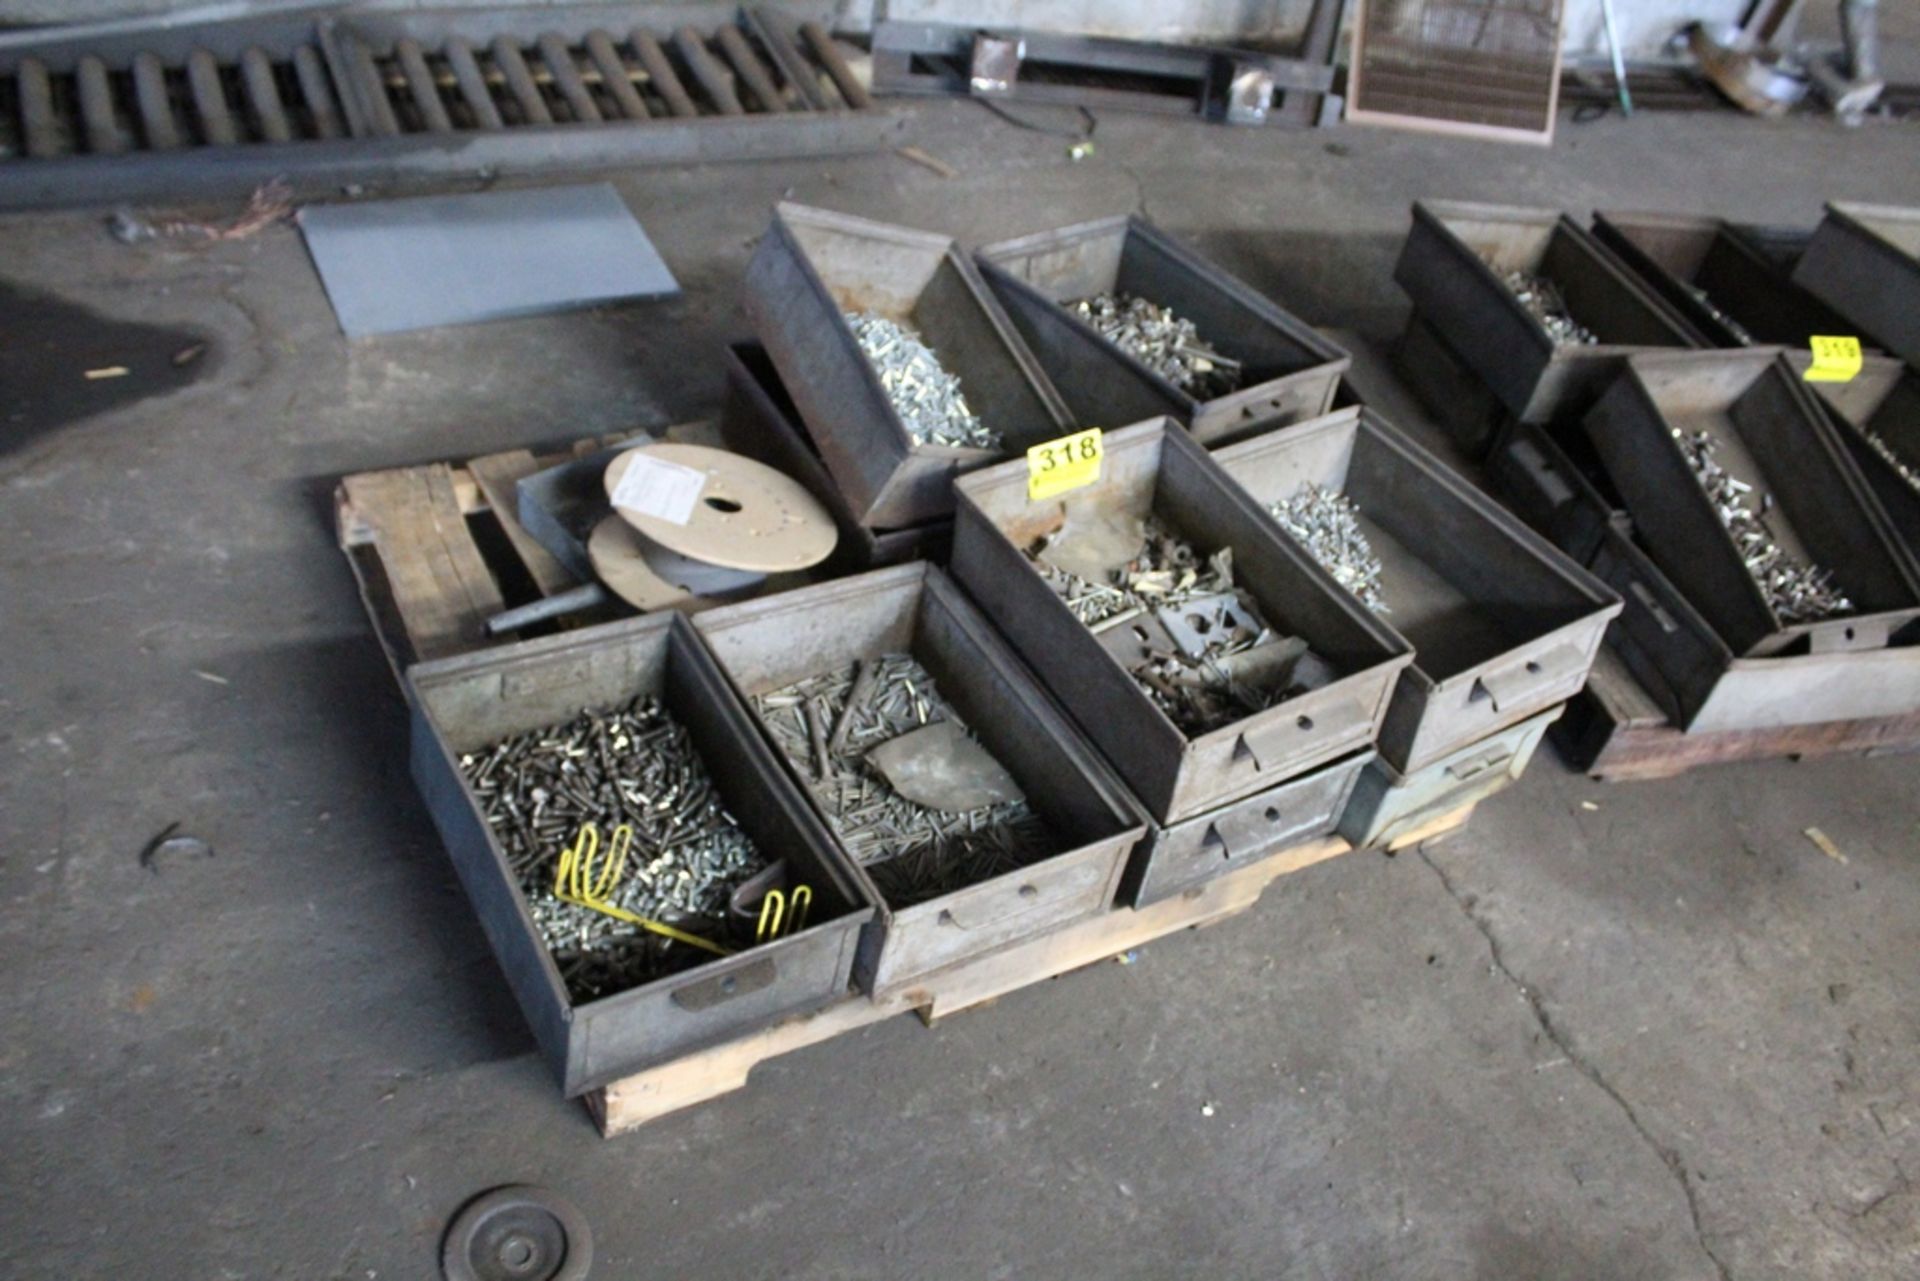 LARGE QTY OF HARDWARE IN BINS, ON SKID